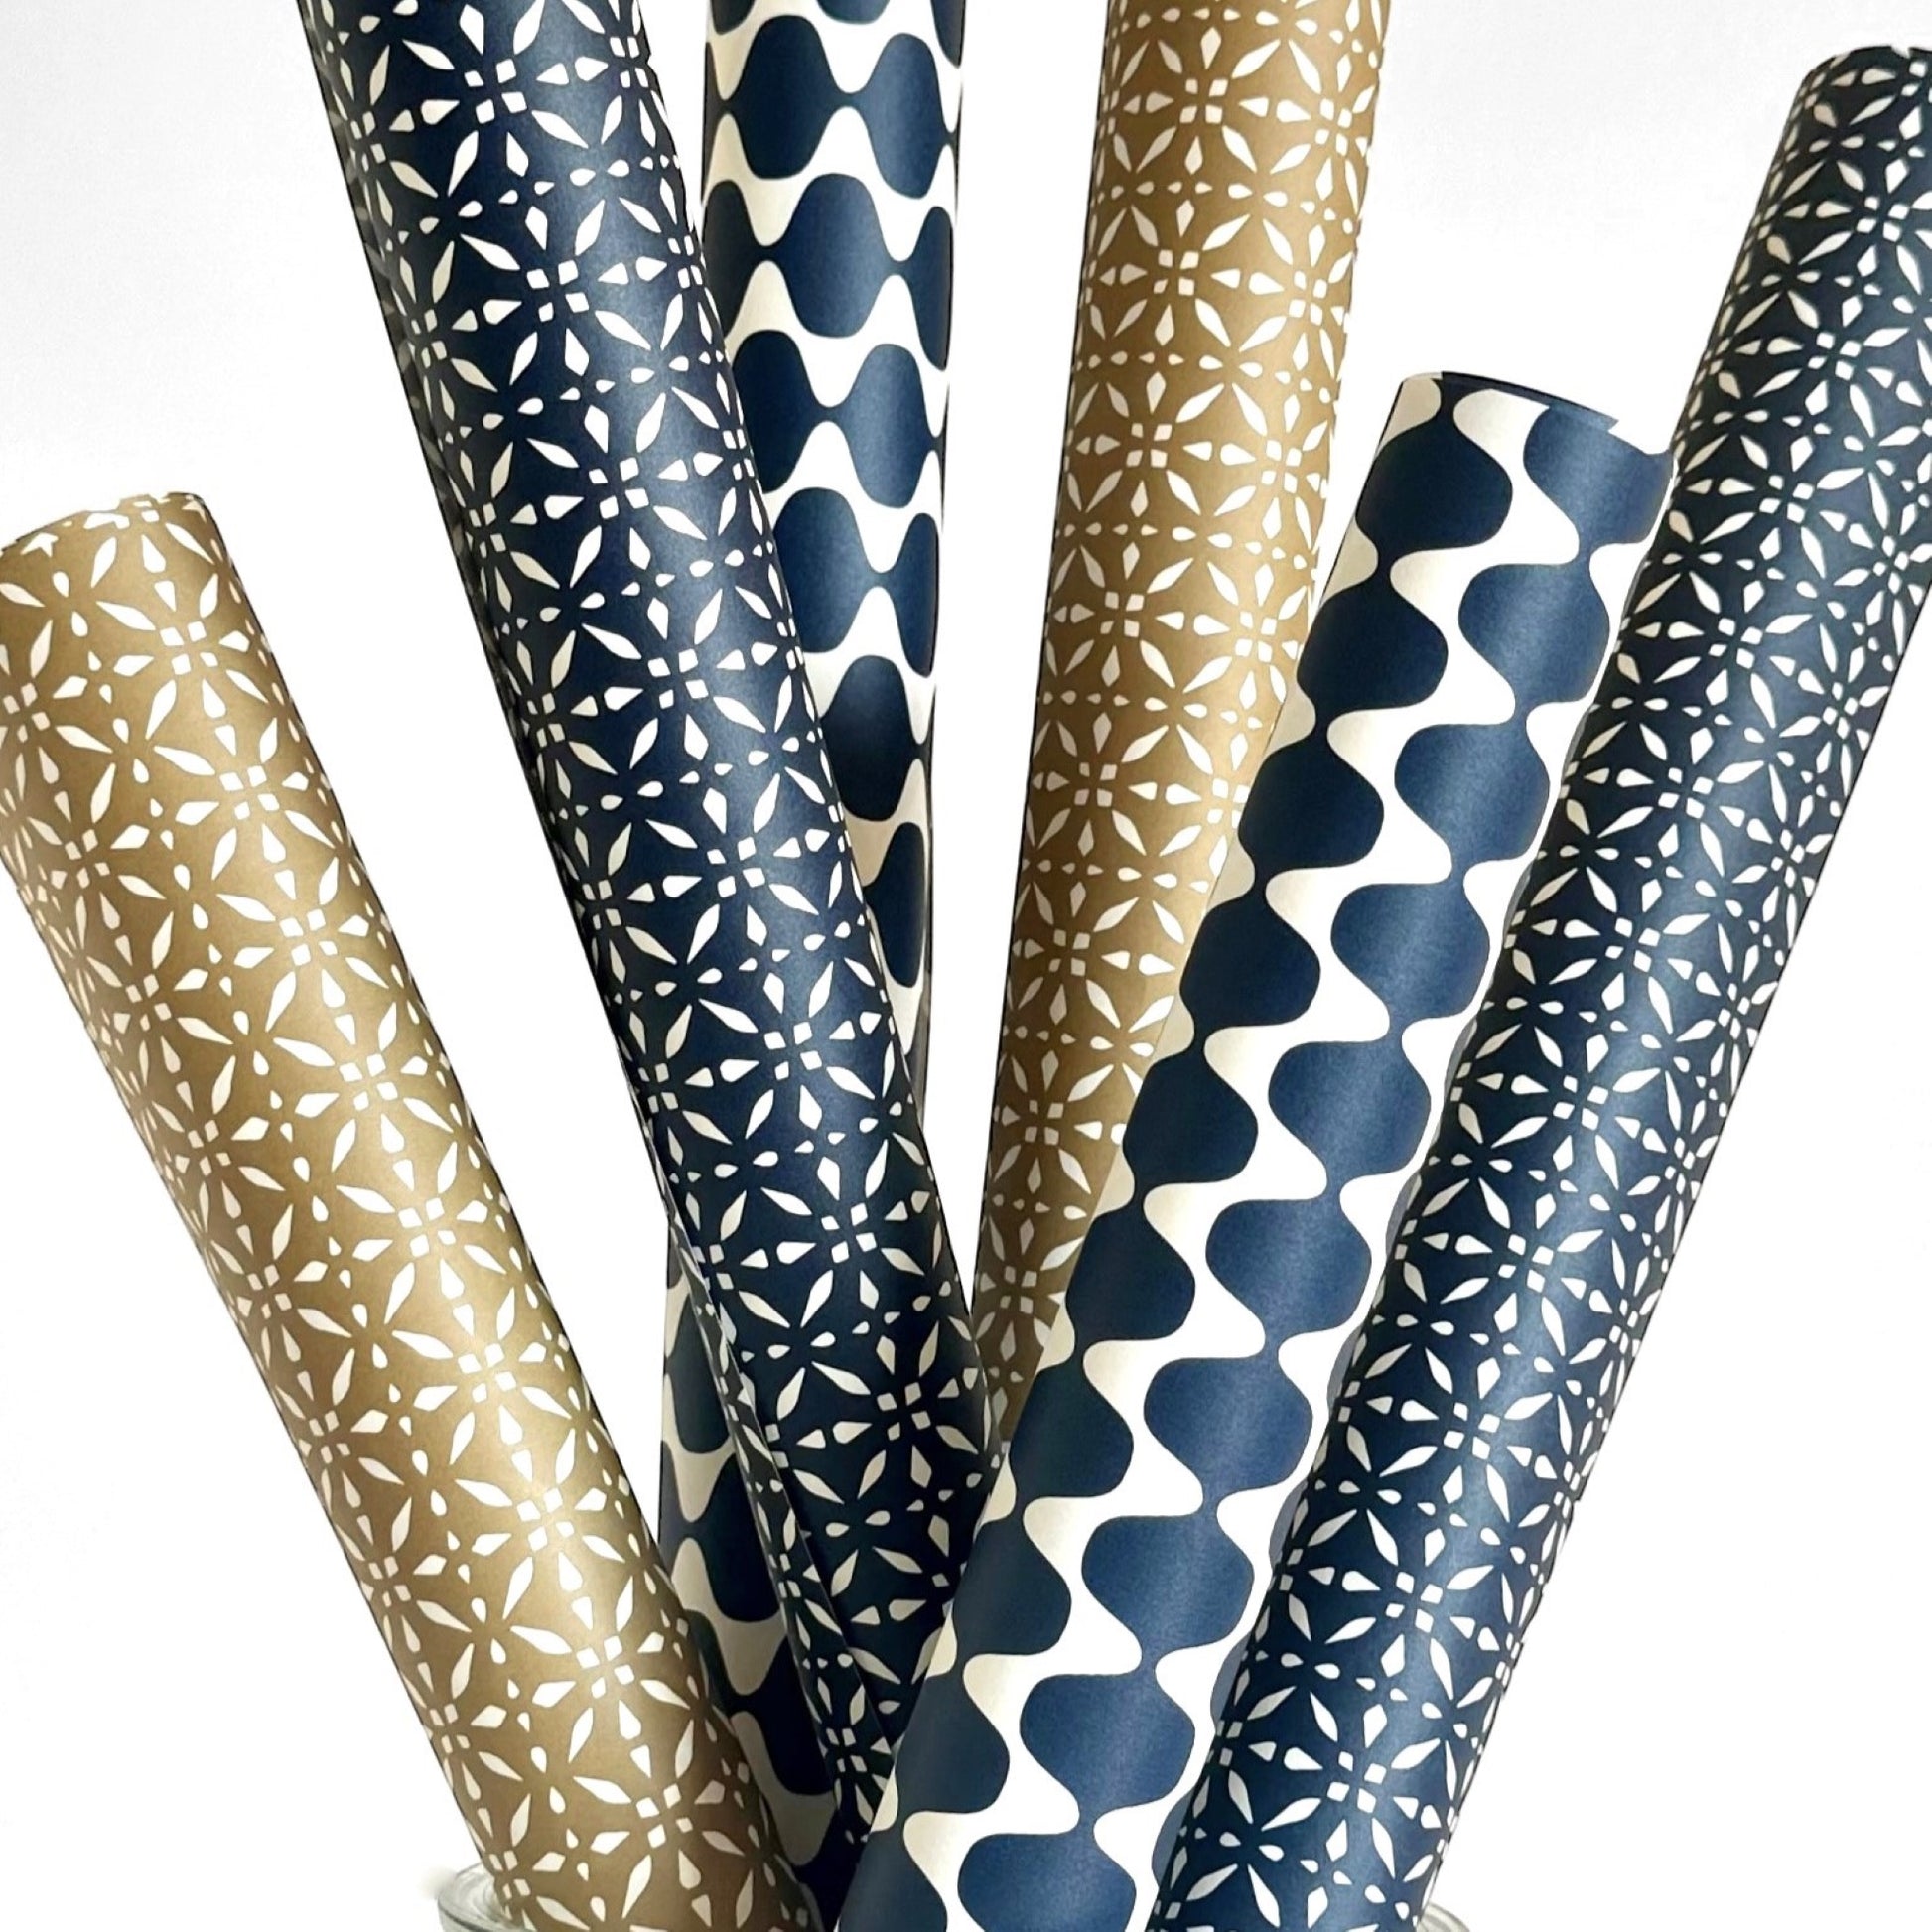 wrapping paper by Otto Editions with a cut-out wavy design in white on an indigo background. Pictured rolled with other designs